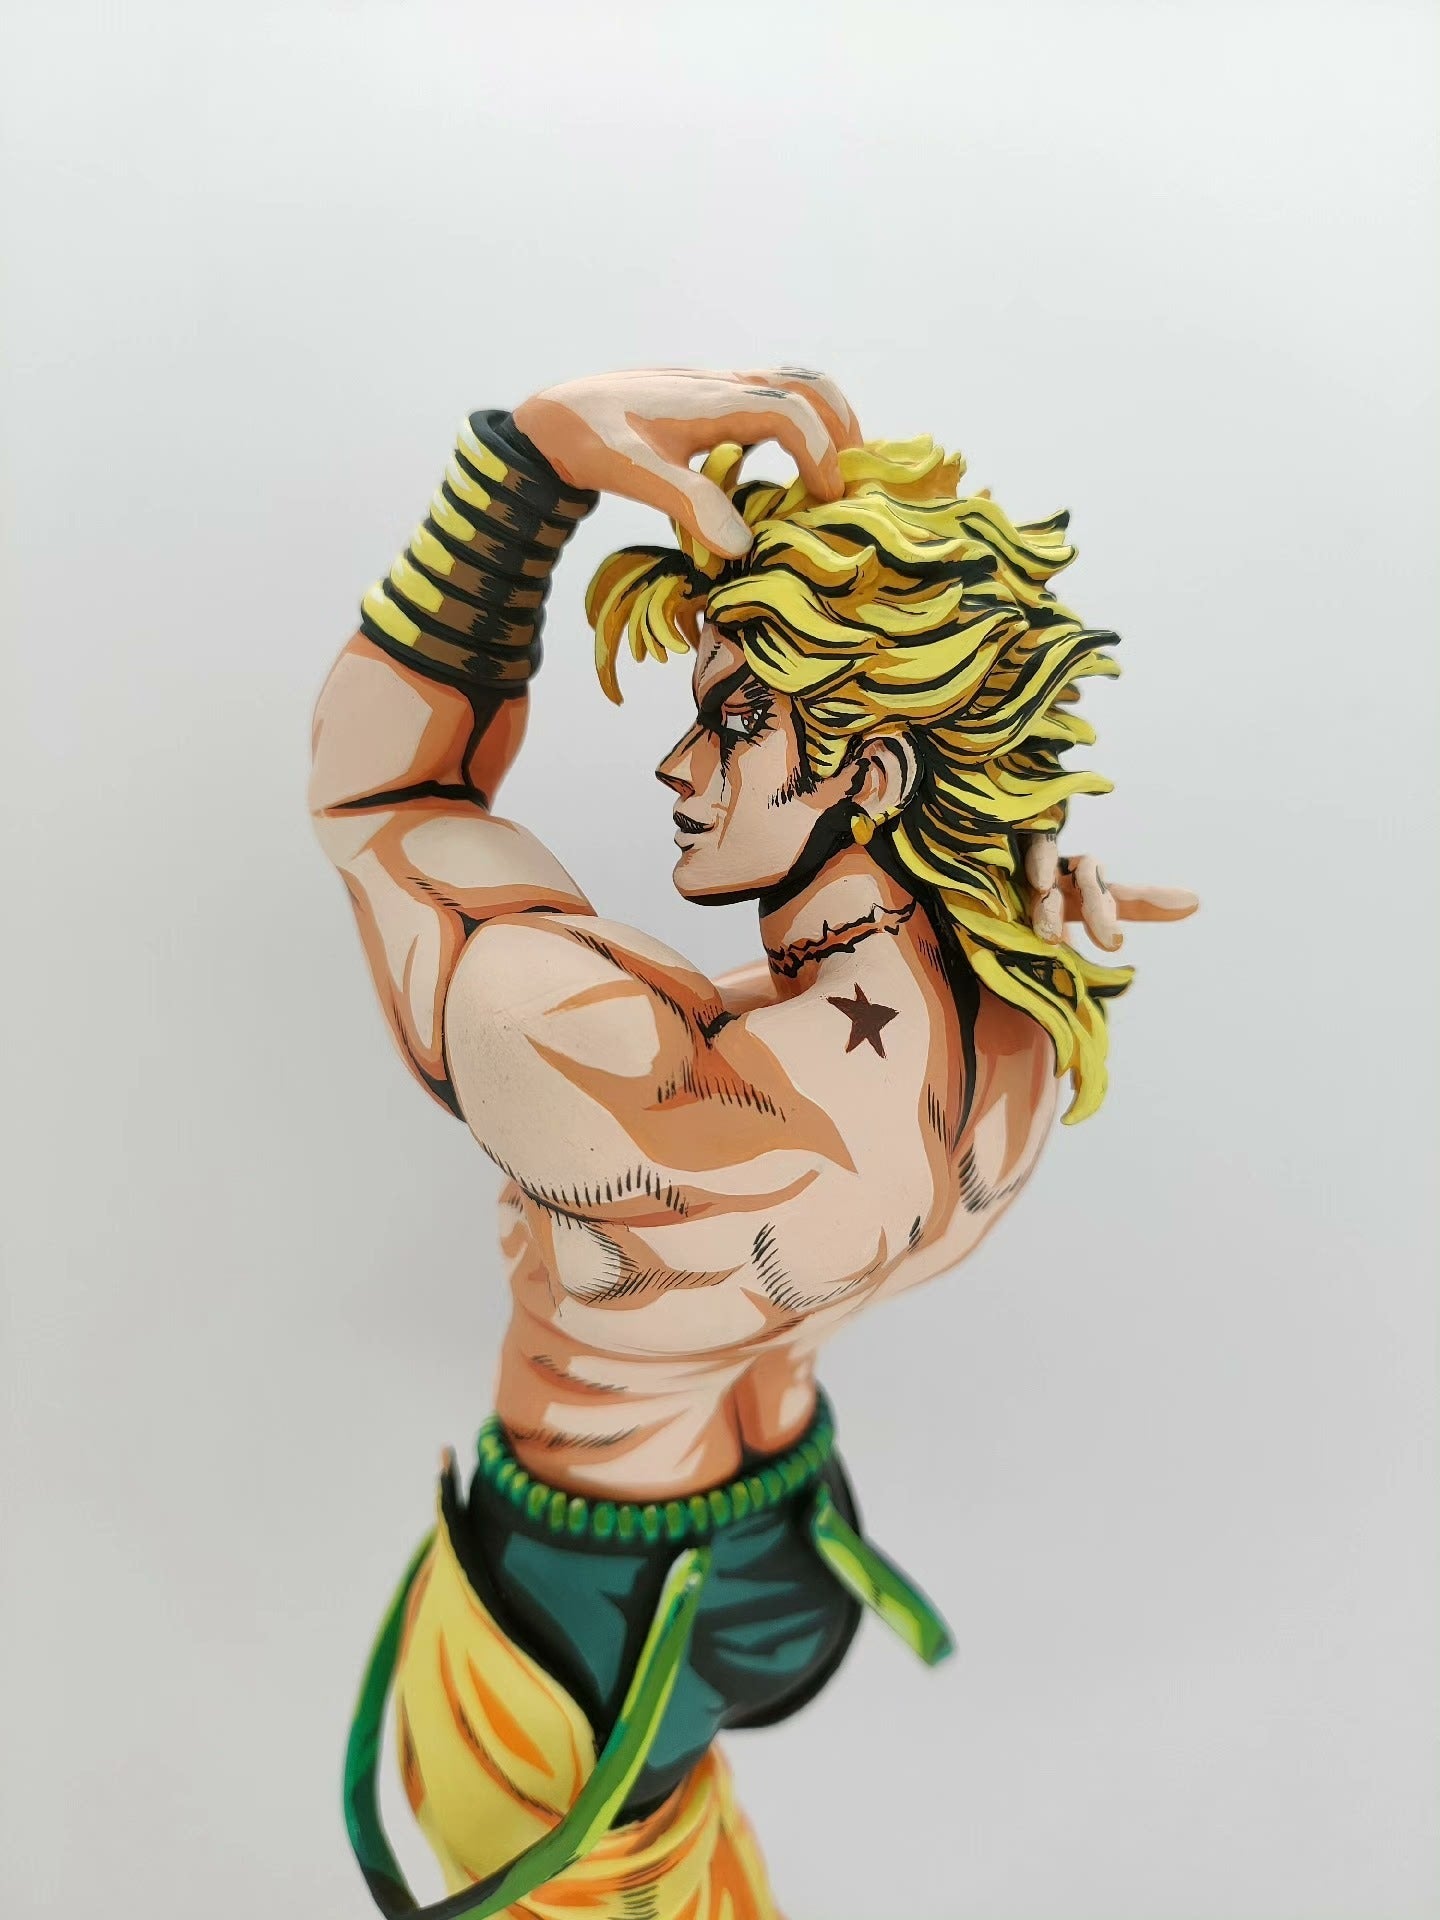 Dual_project_art - 🔥KONO DIO DA!🔥 Hope you all like my drawing of Dio,  from jojo😍. I tried to recolor it usings my personal style. Follow me for  other anime drawings, and leave